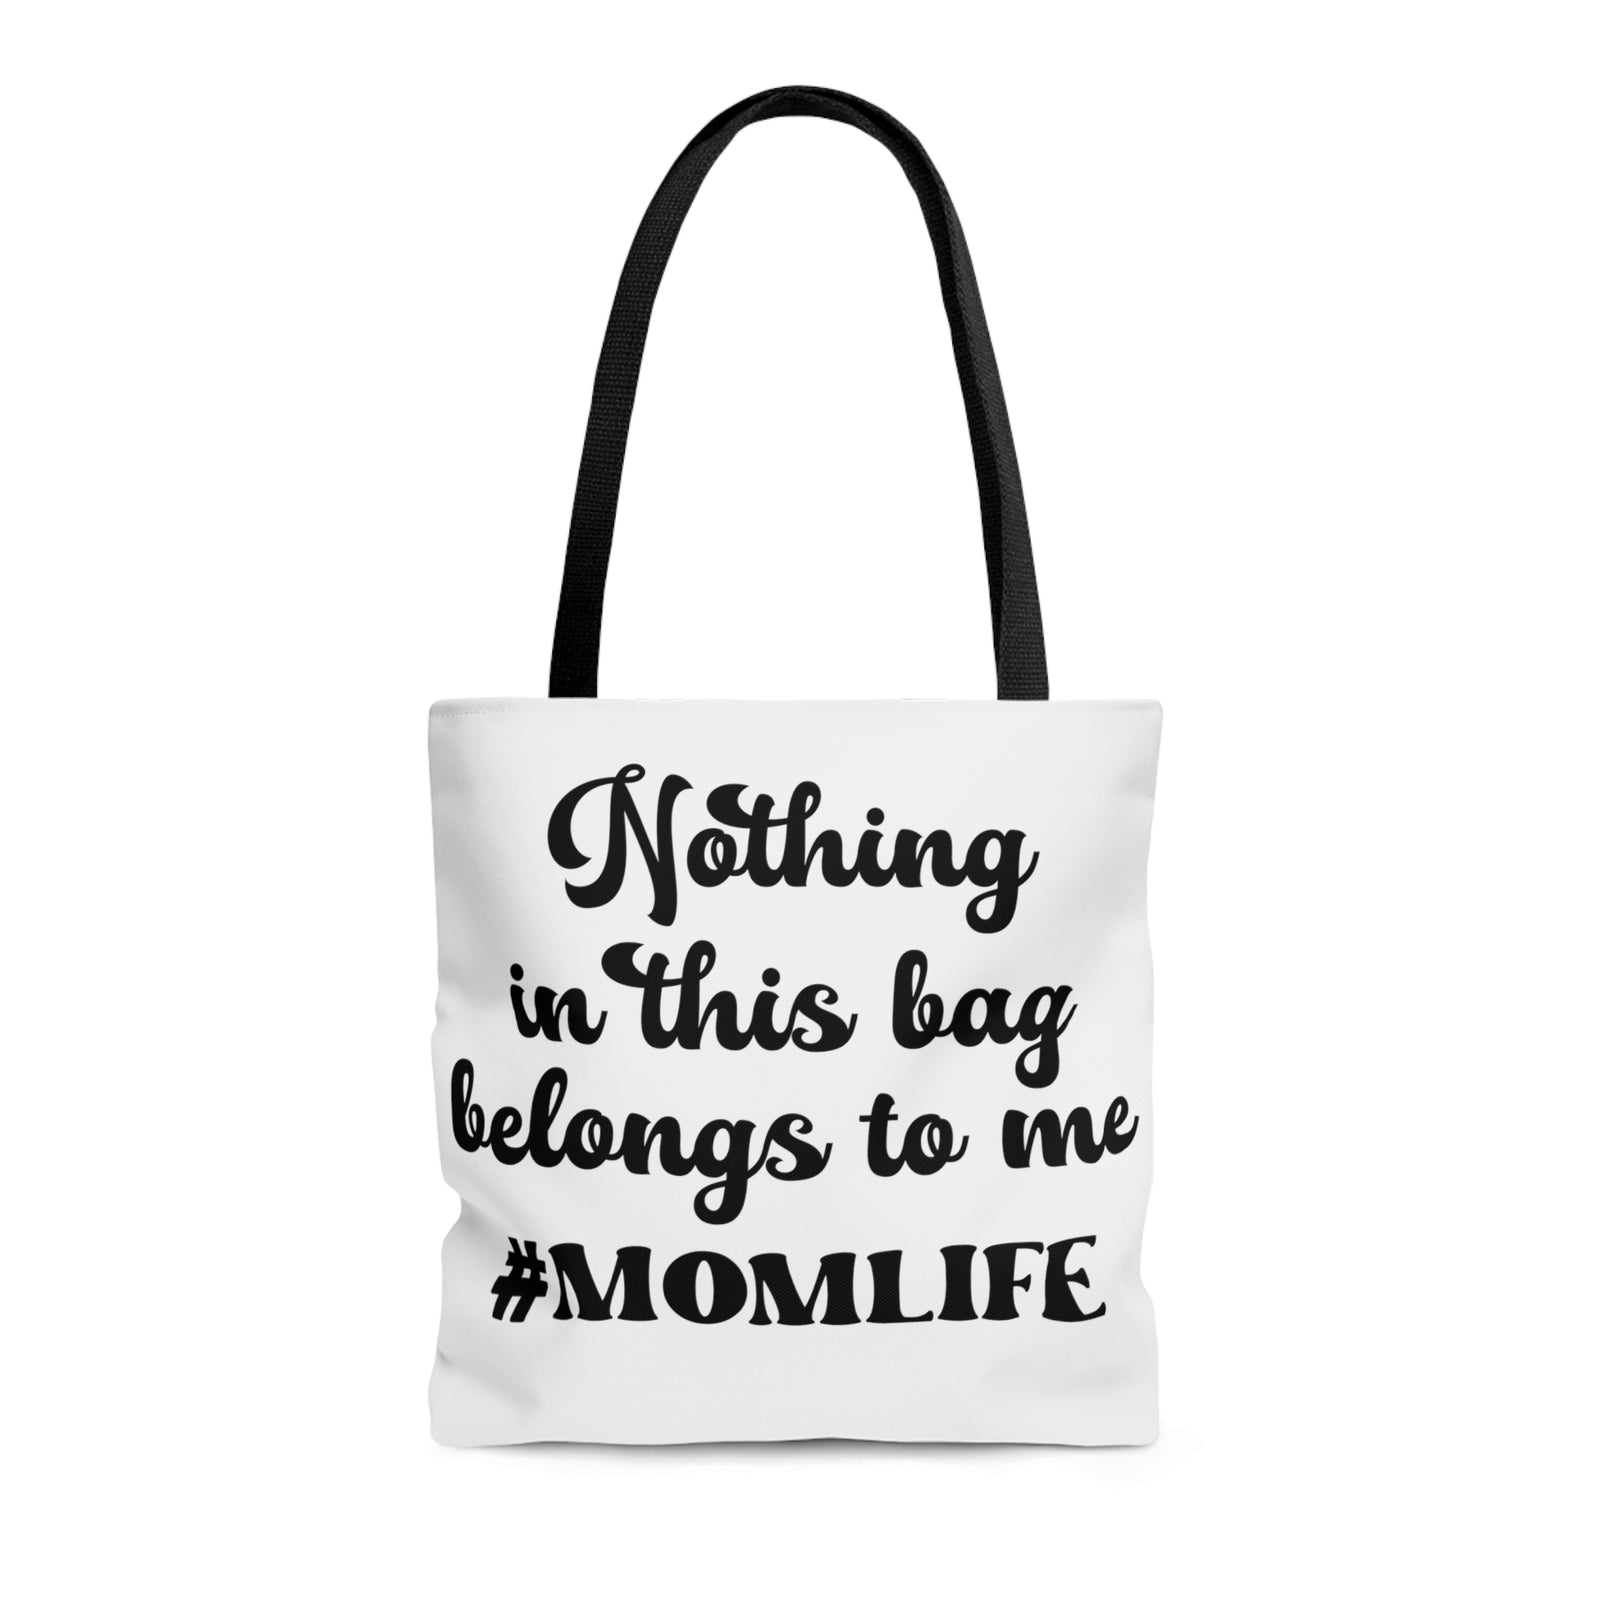 Nothing in this bag - Sarcasm Swag